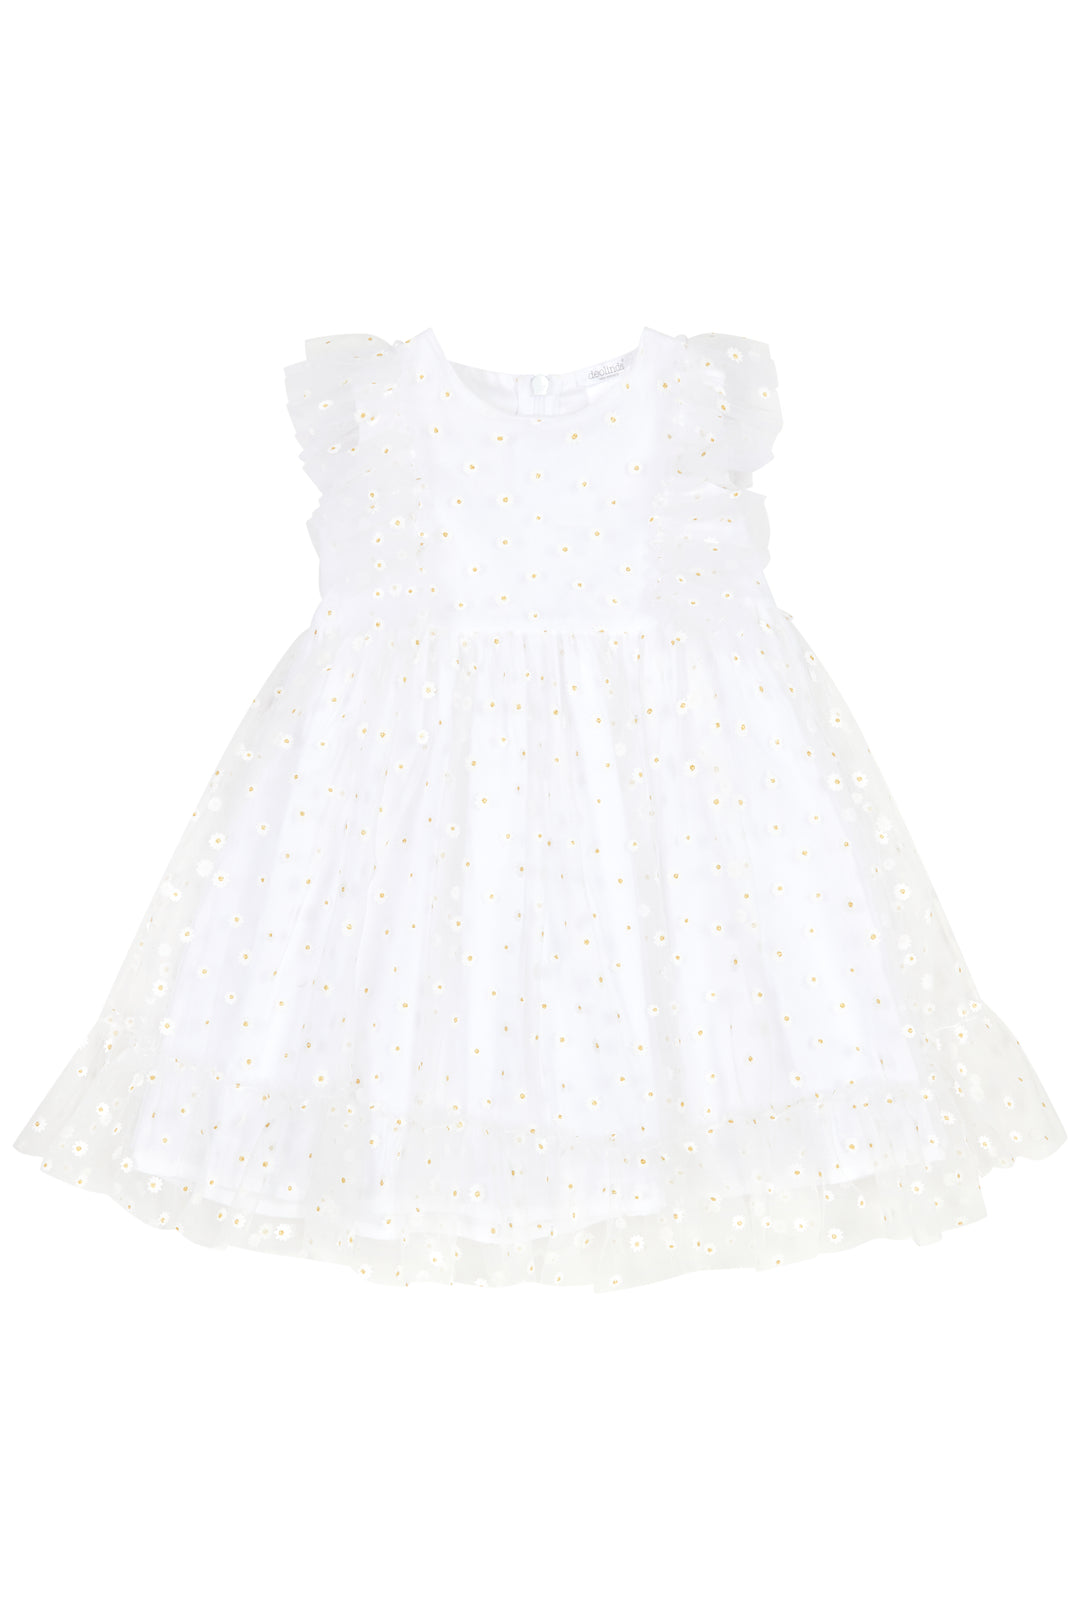 Chic by Deolinda PREORDER "Anastasia" White Tulle Daisy Print Dress | Millie and John